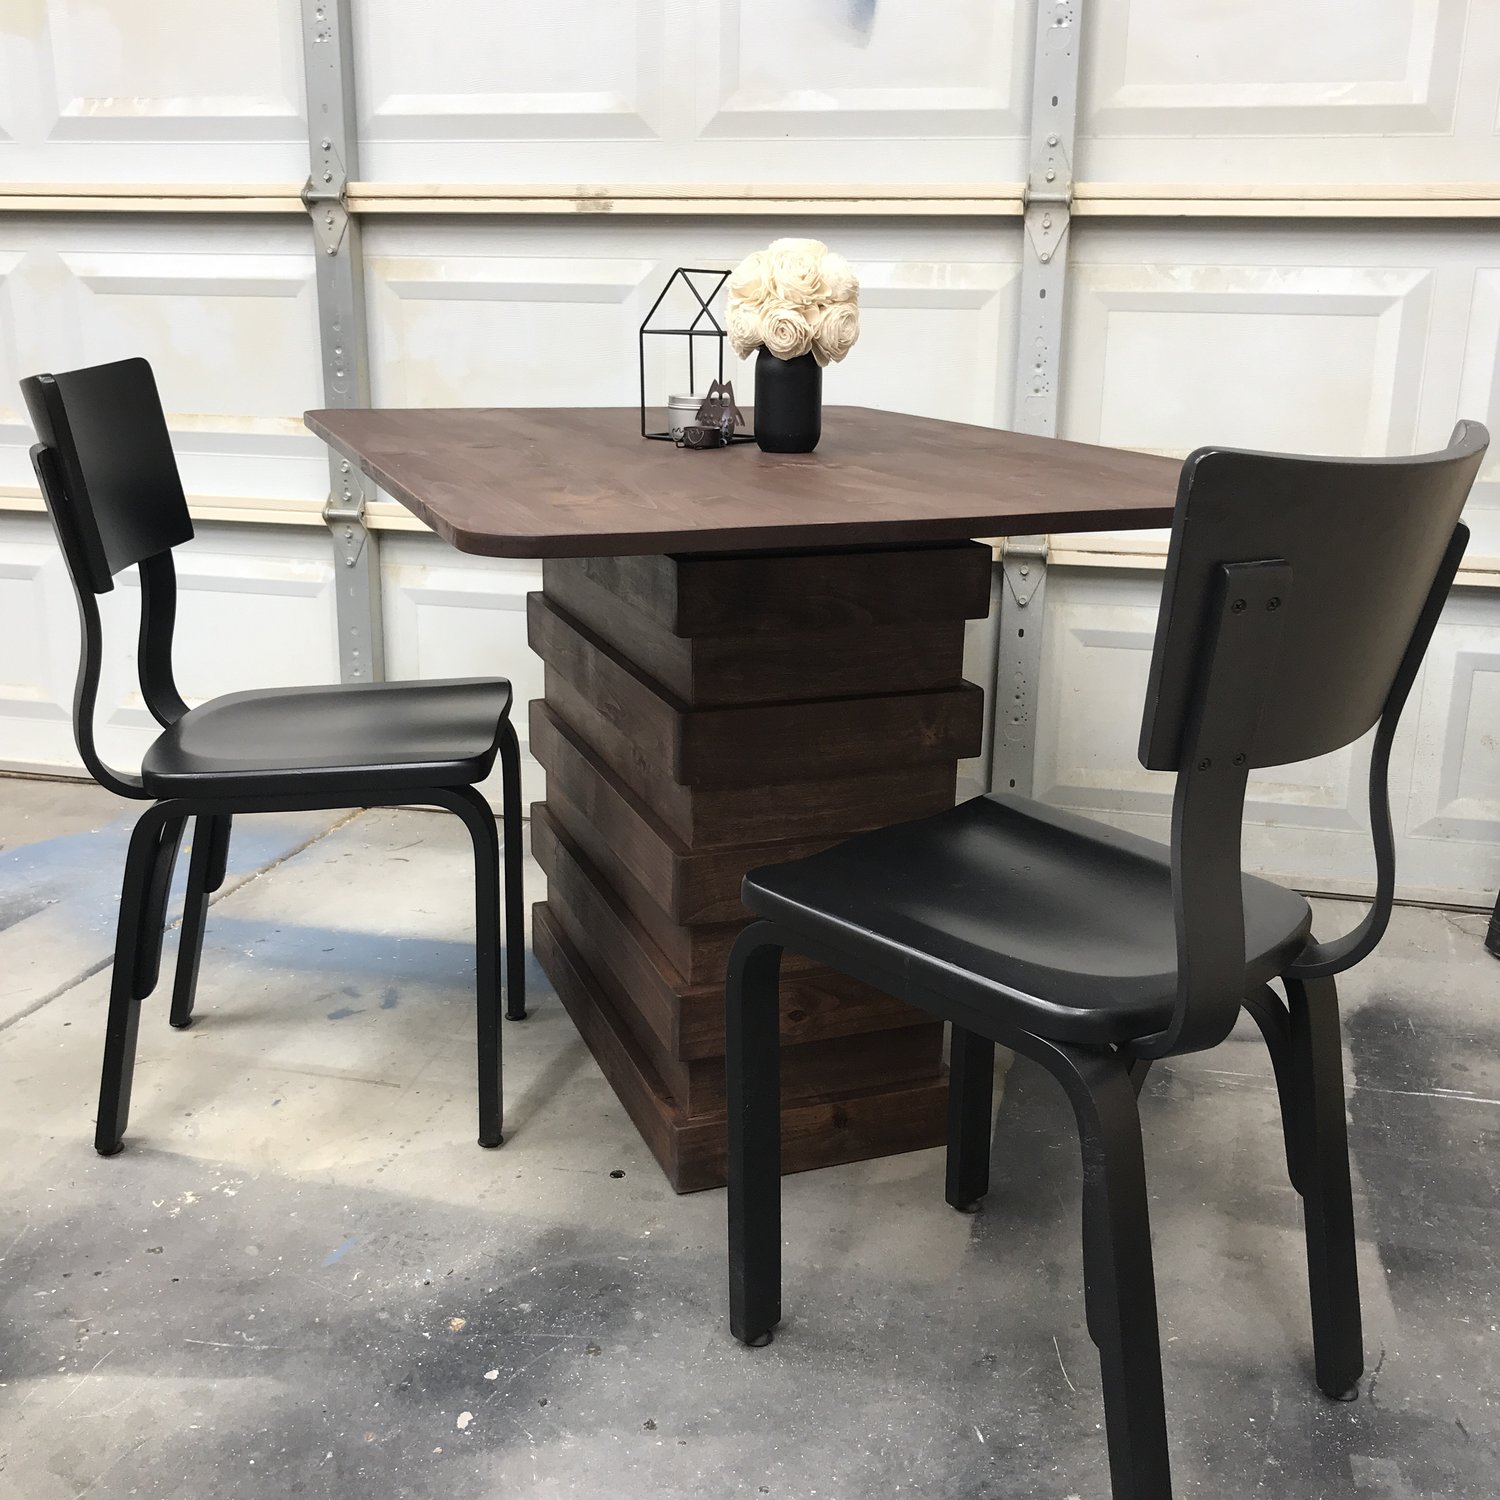 Diy Stacked Restoration Hardware Knockoff Dining Table The